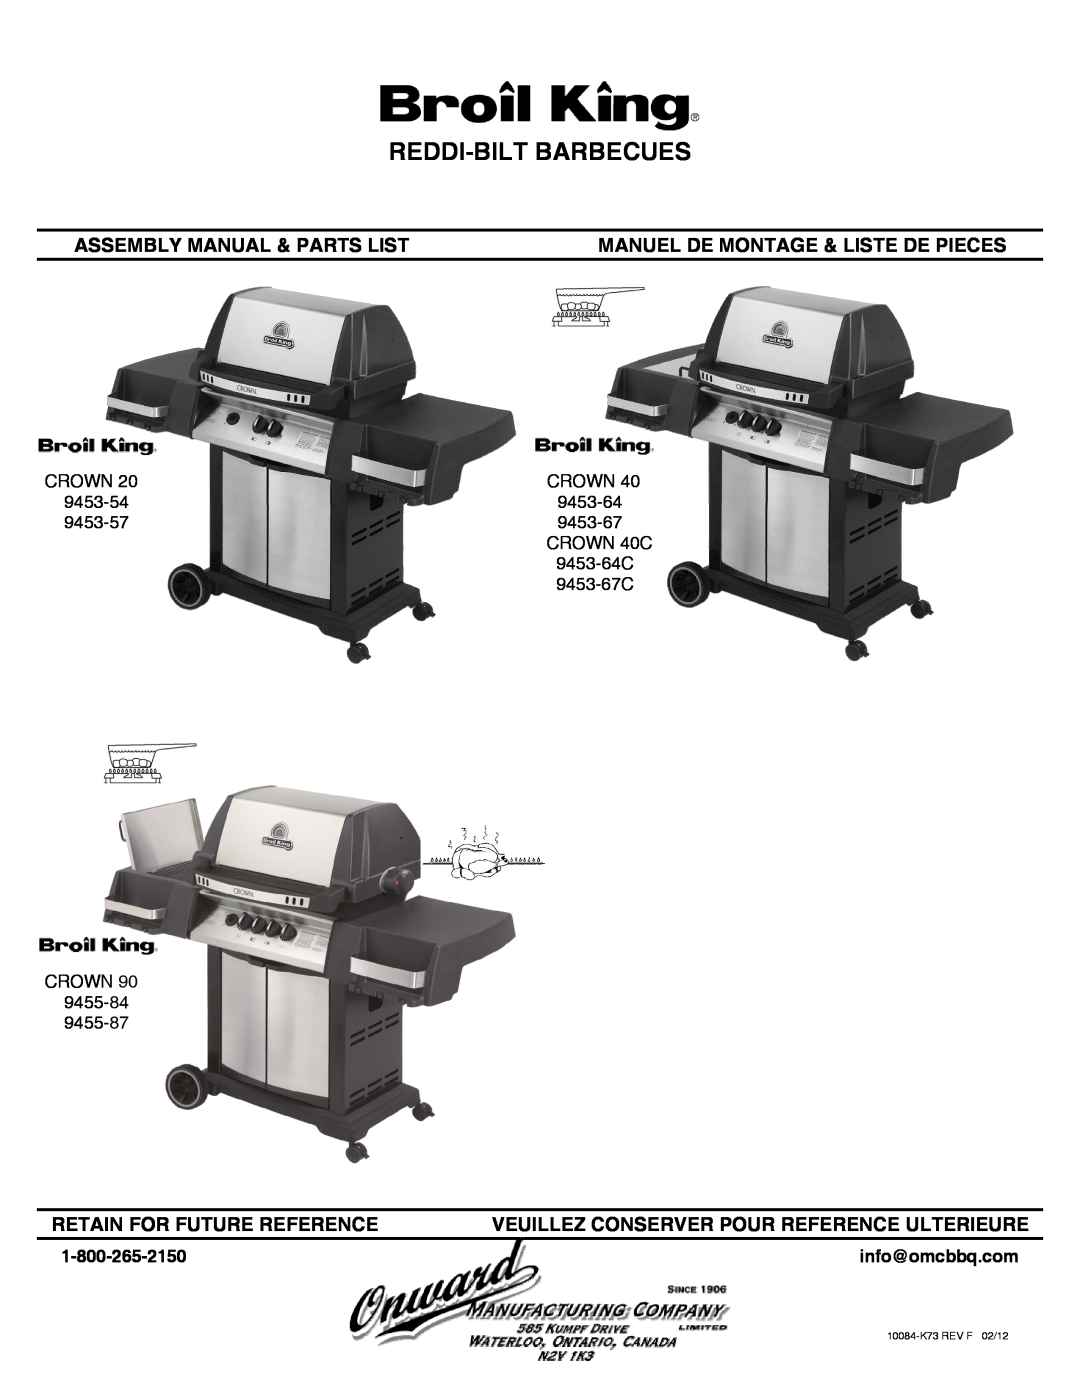 Broil King 9453-67 manual info@omcbbq.com, Reddi-Bilt Barbecues, Assembly Manual & Parts List, Retain For Future Reference 